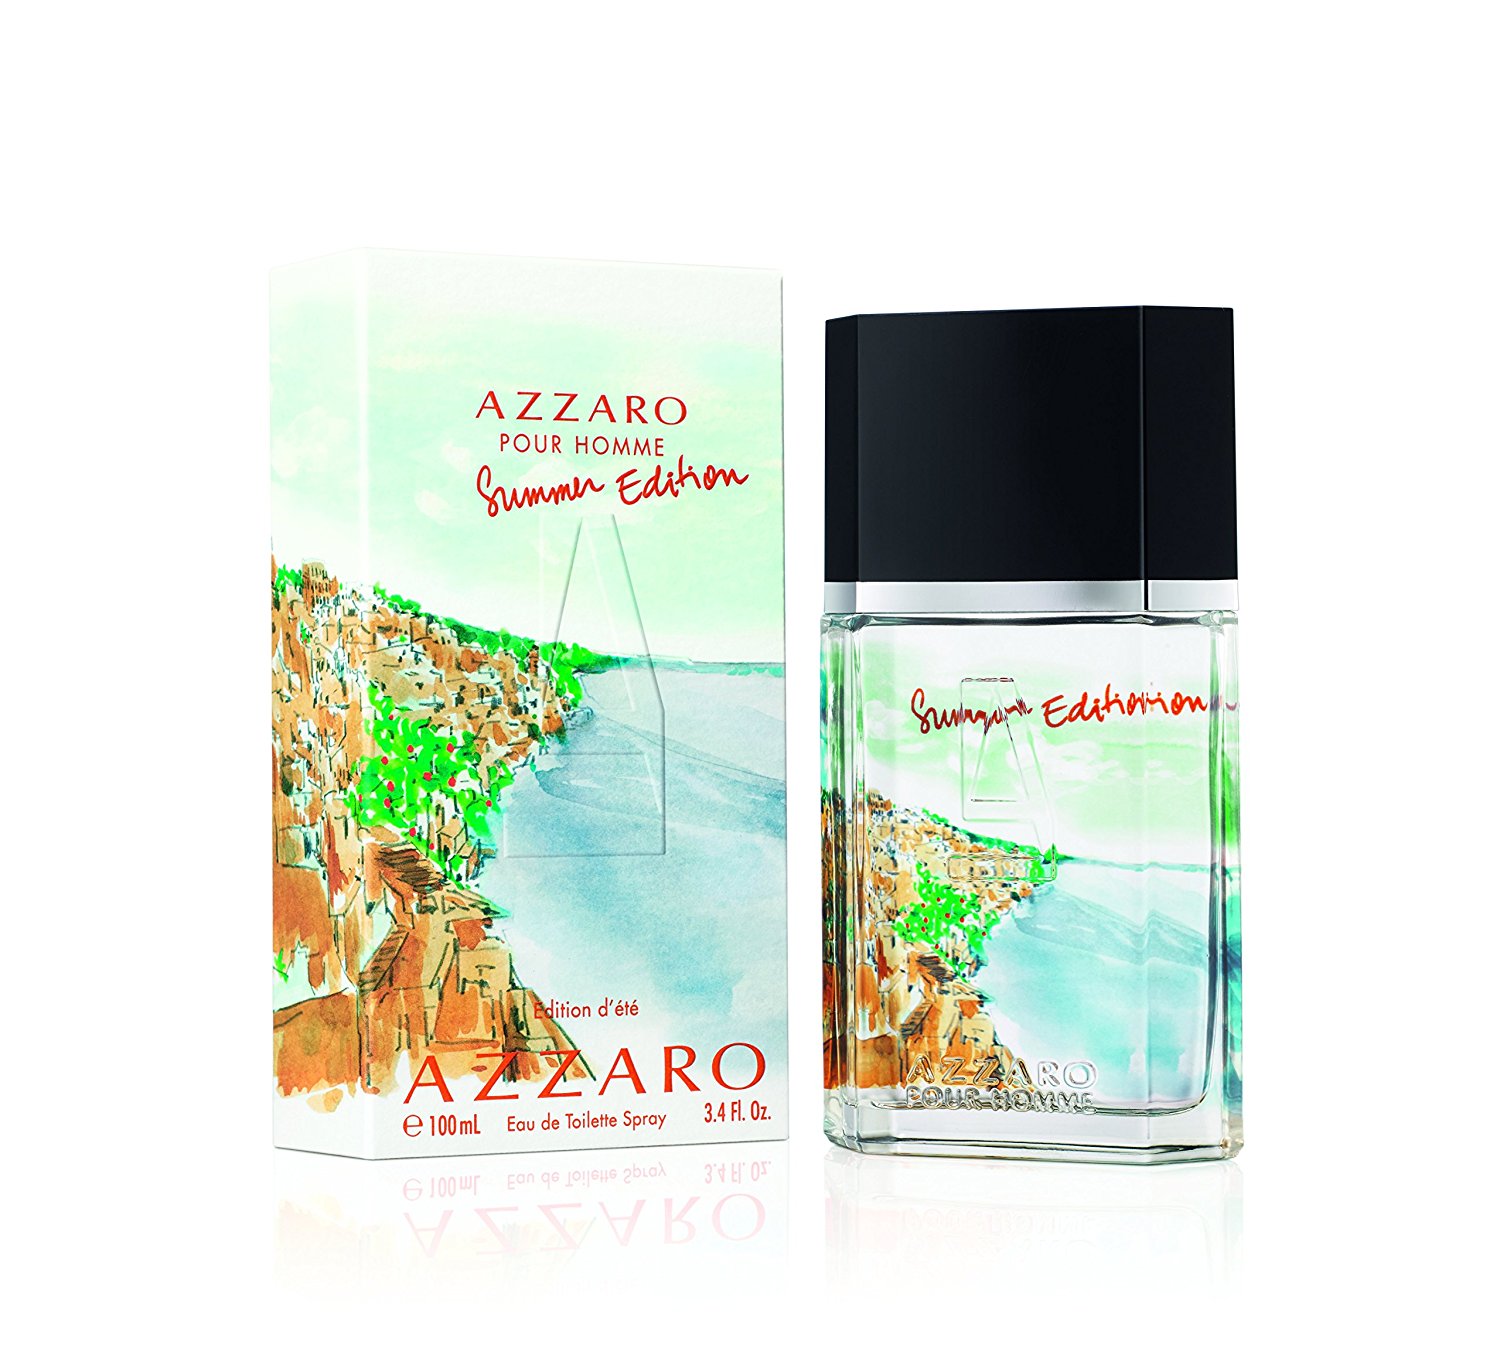 AZZARO POUR HOMME SUMMER EDITION 2013